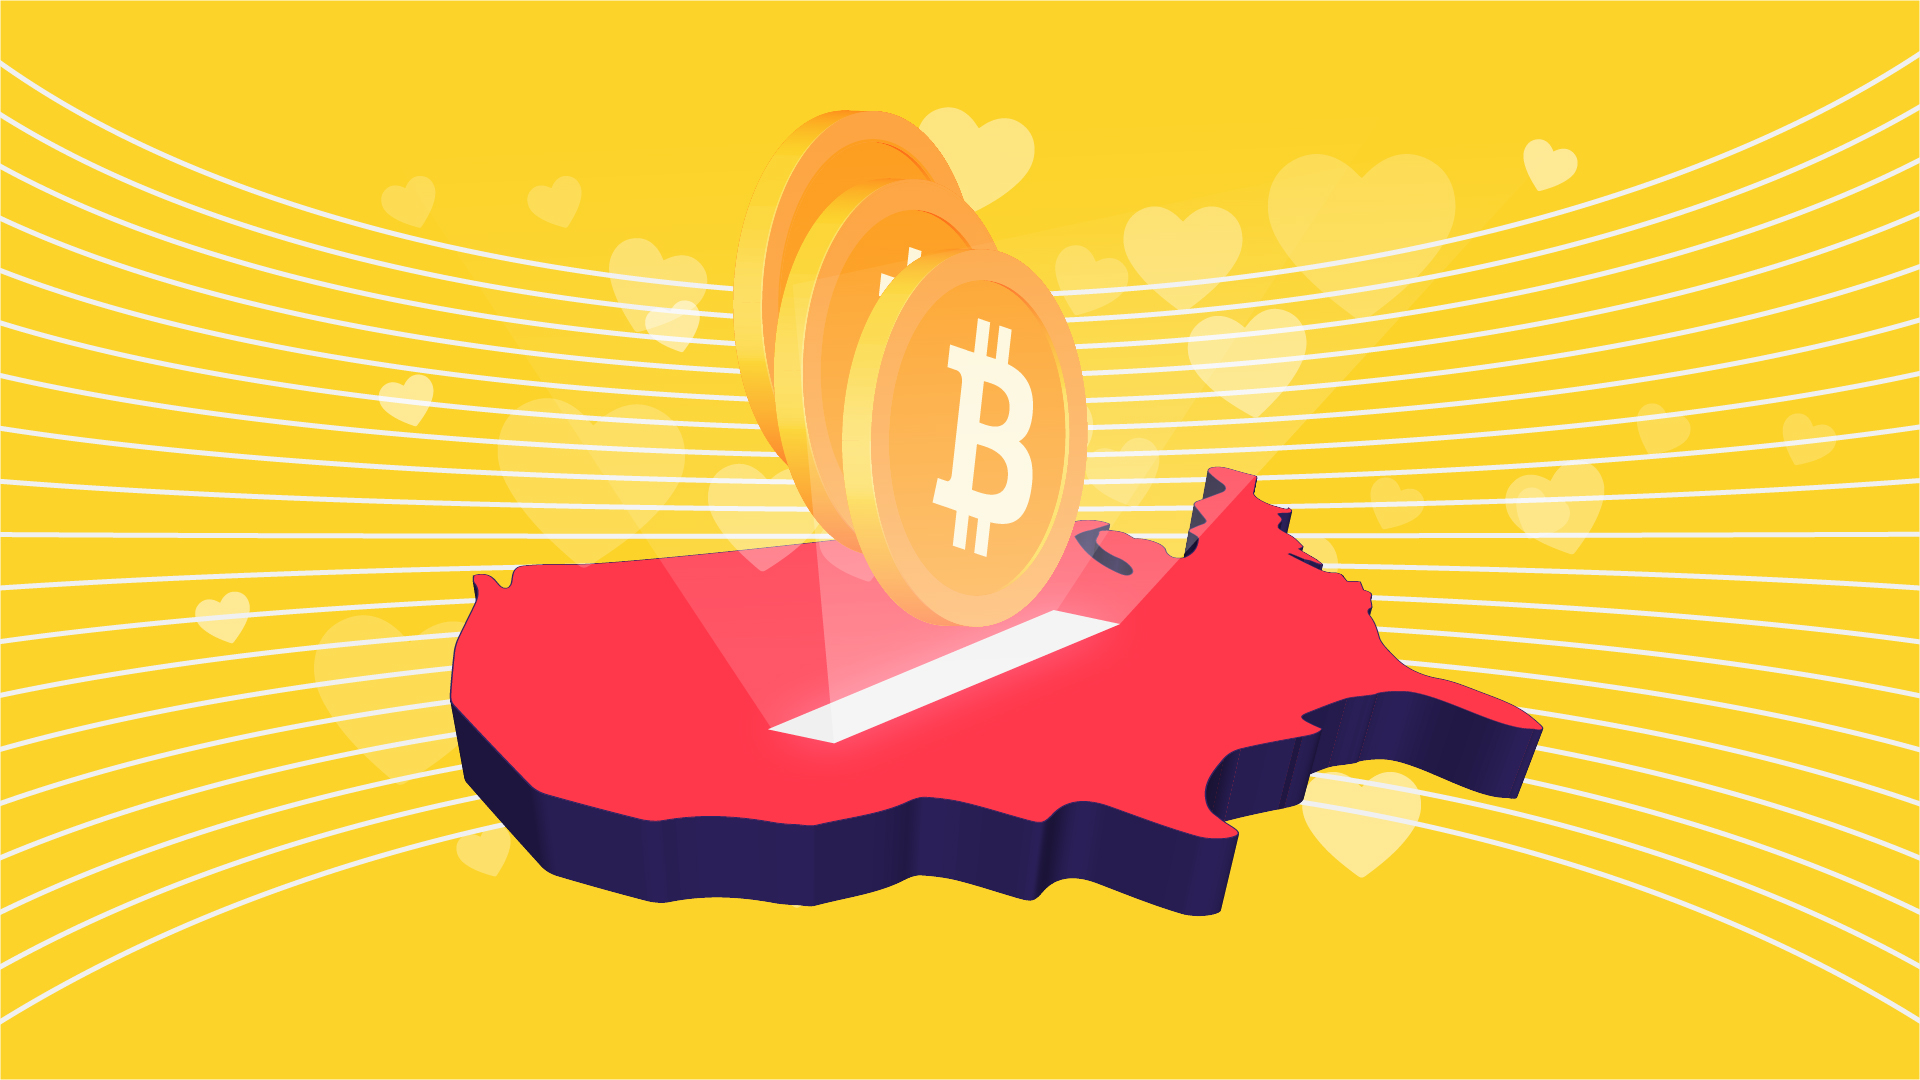 Relive bitcoin's historic rise with these 22 perfect internet